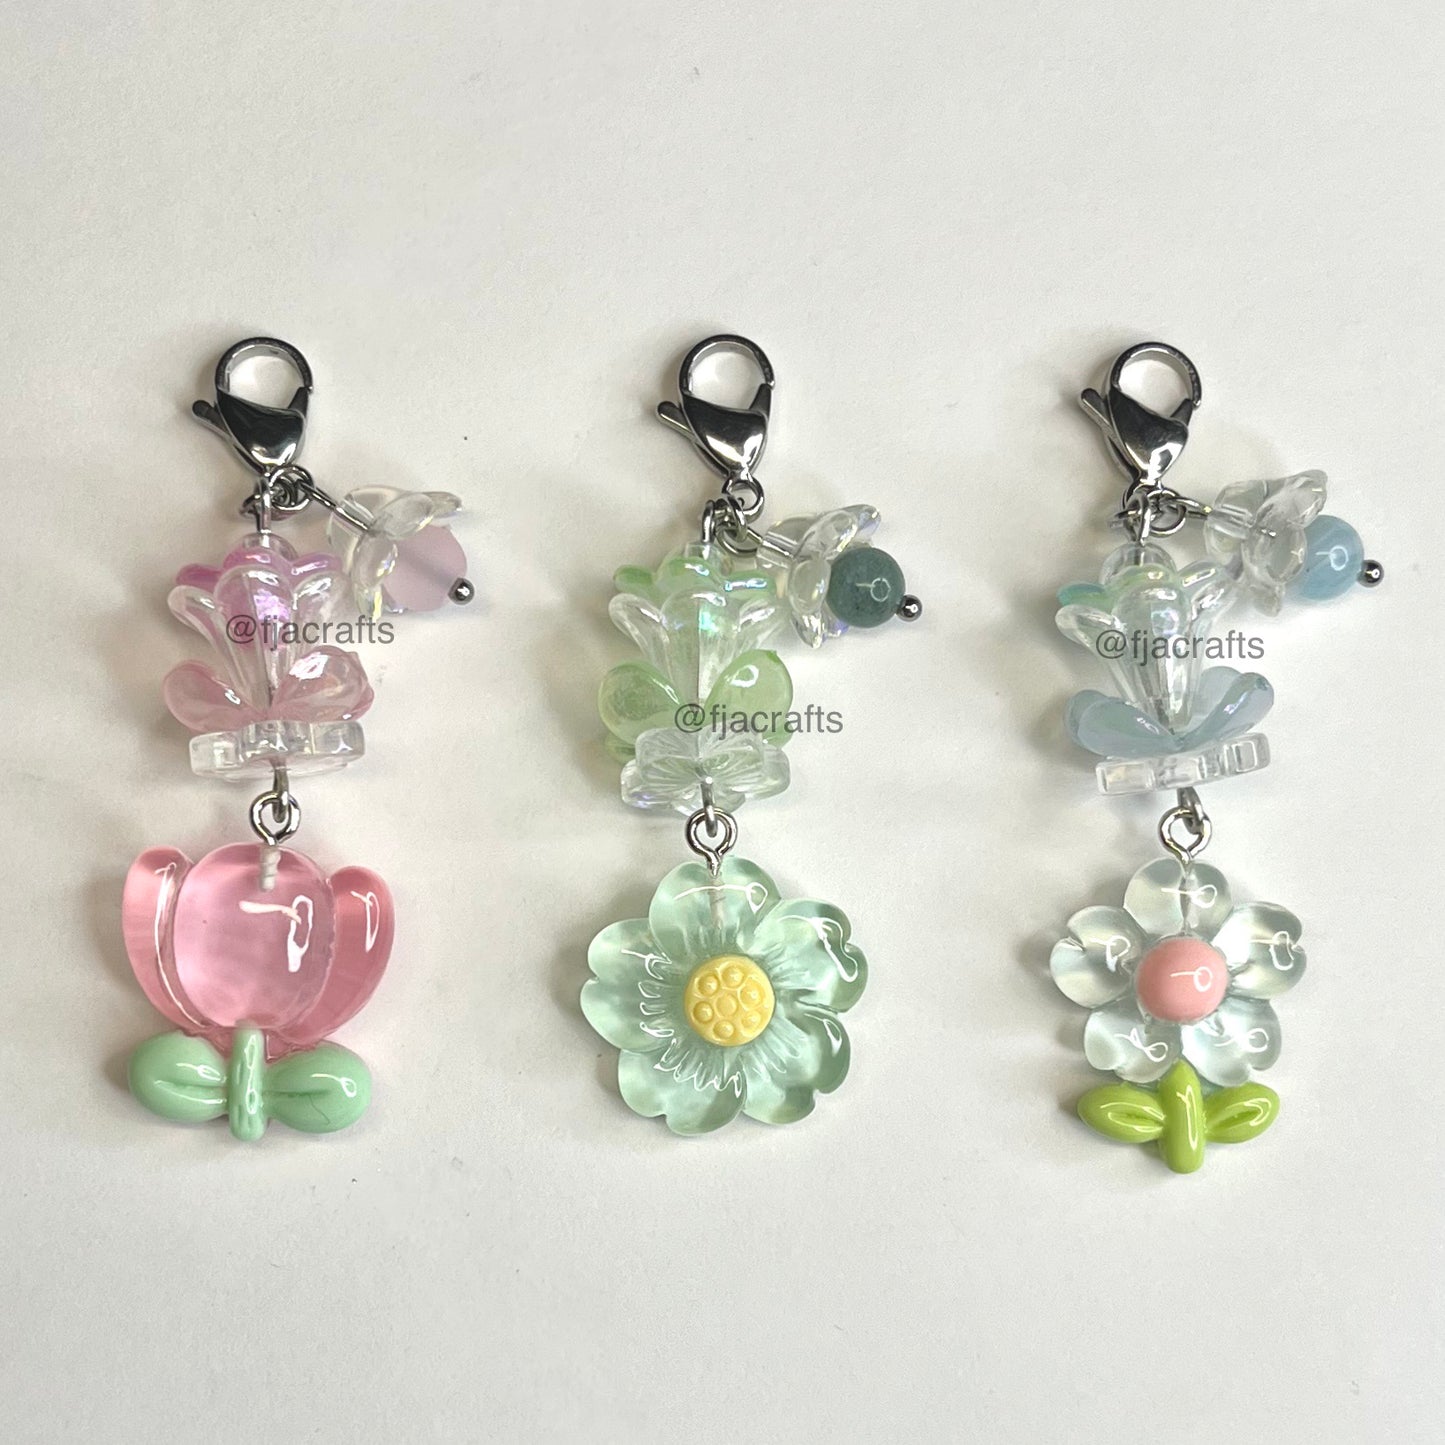 Cute Beaded Flower Zipper Charm Pulls Keychain Bag Clip | green, pink, blue, dainty, fairy | Outdoorsy Collection FJA Crafts